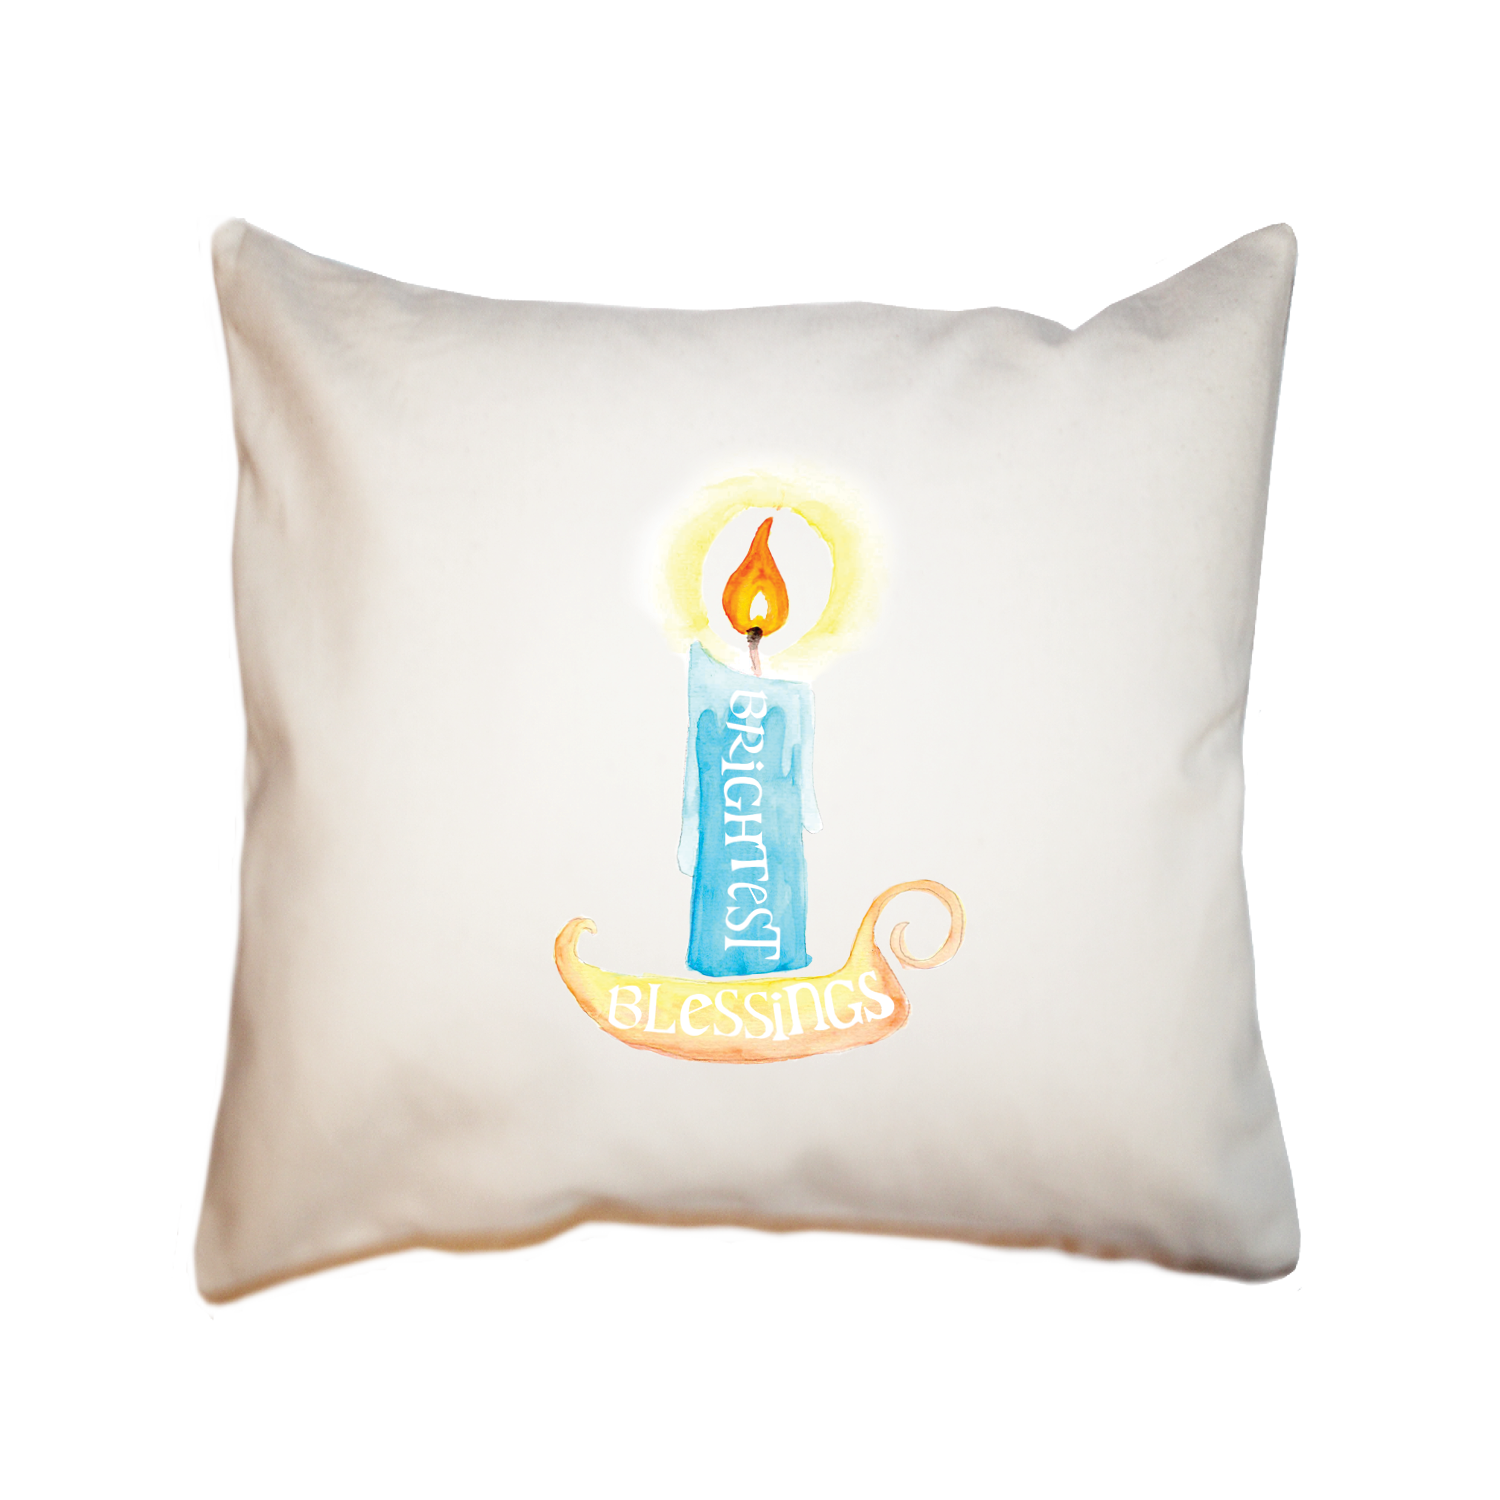 brightest blessings square pillow